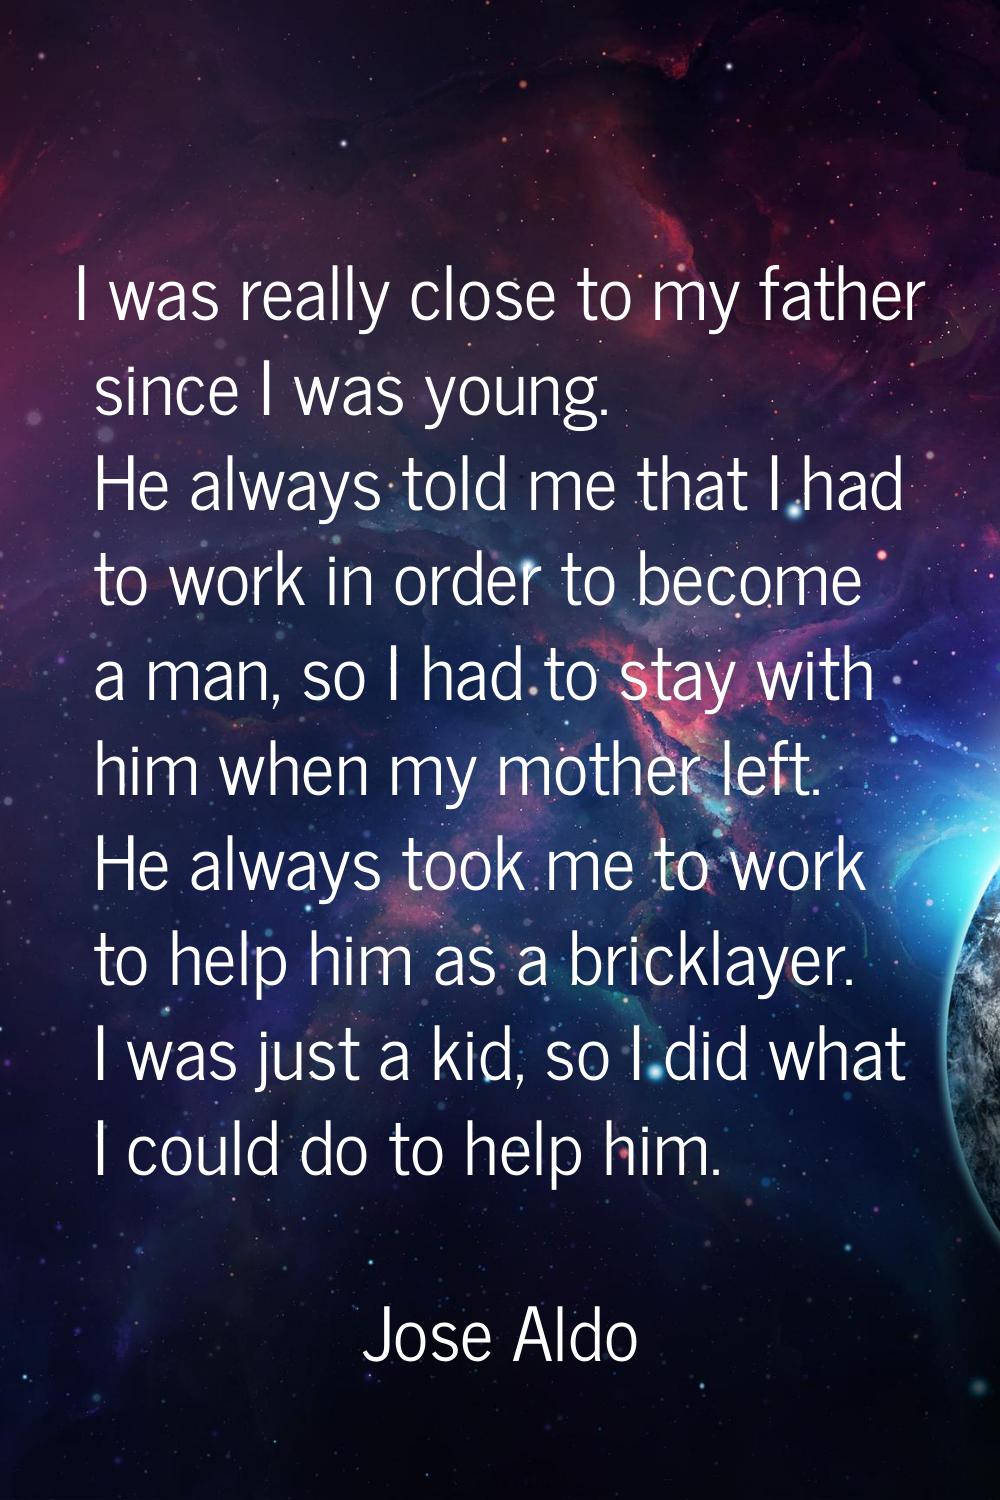 I was really close to my father since I was young. He always told me that I had to work in order to